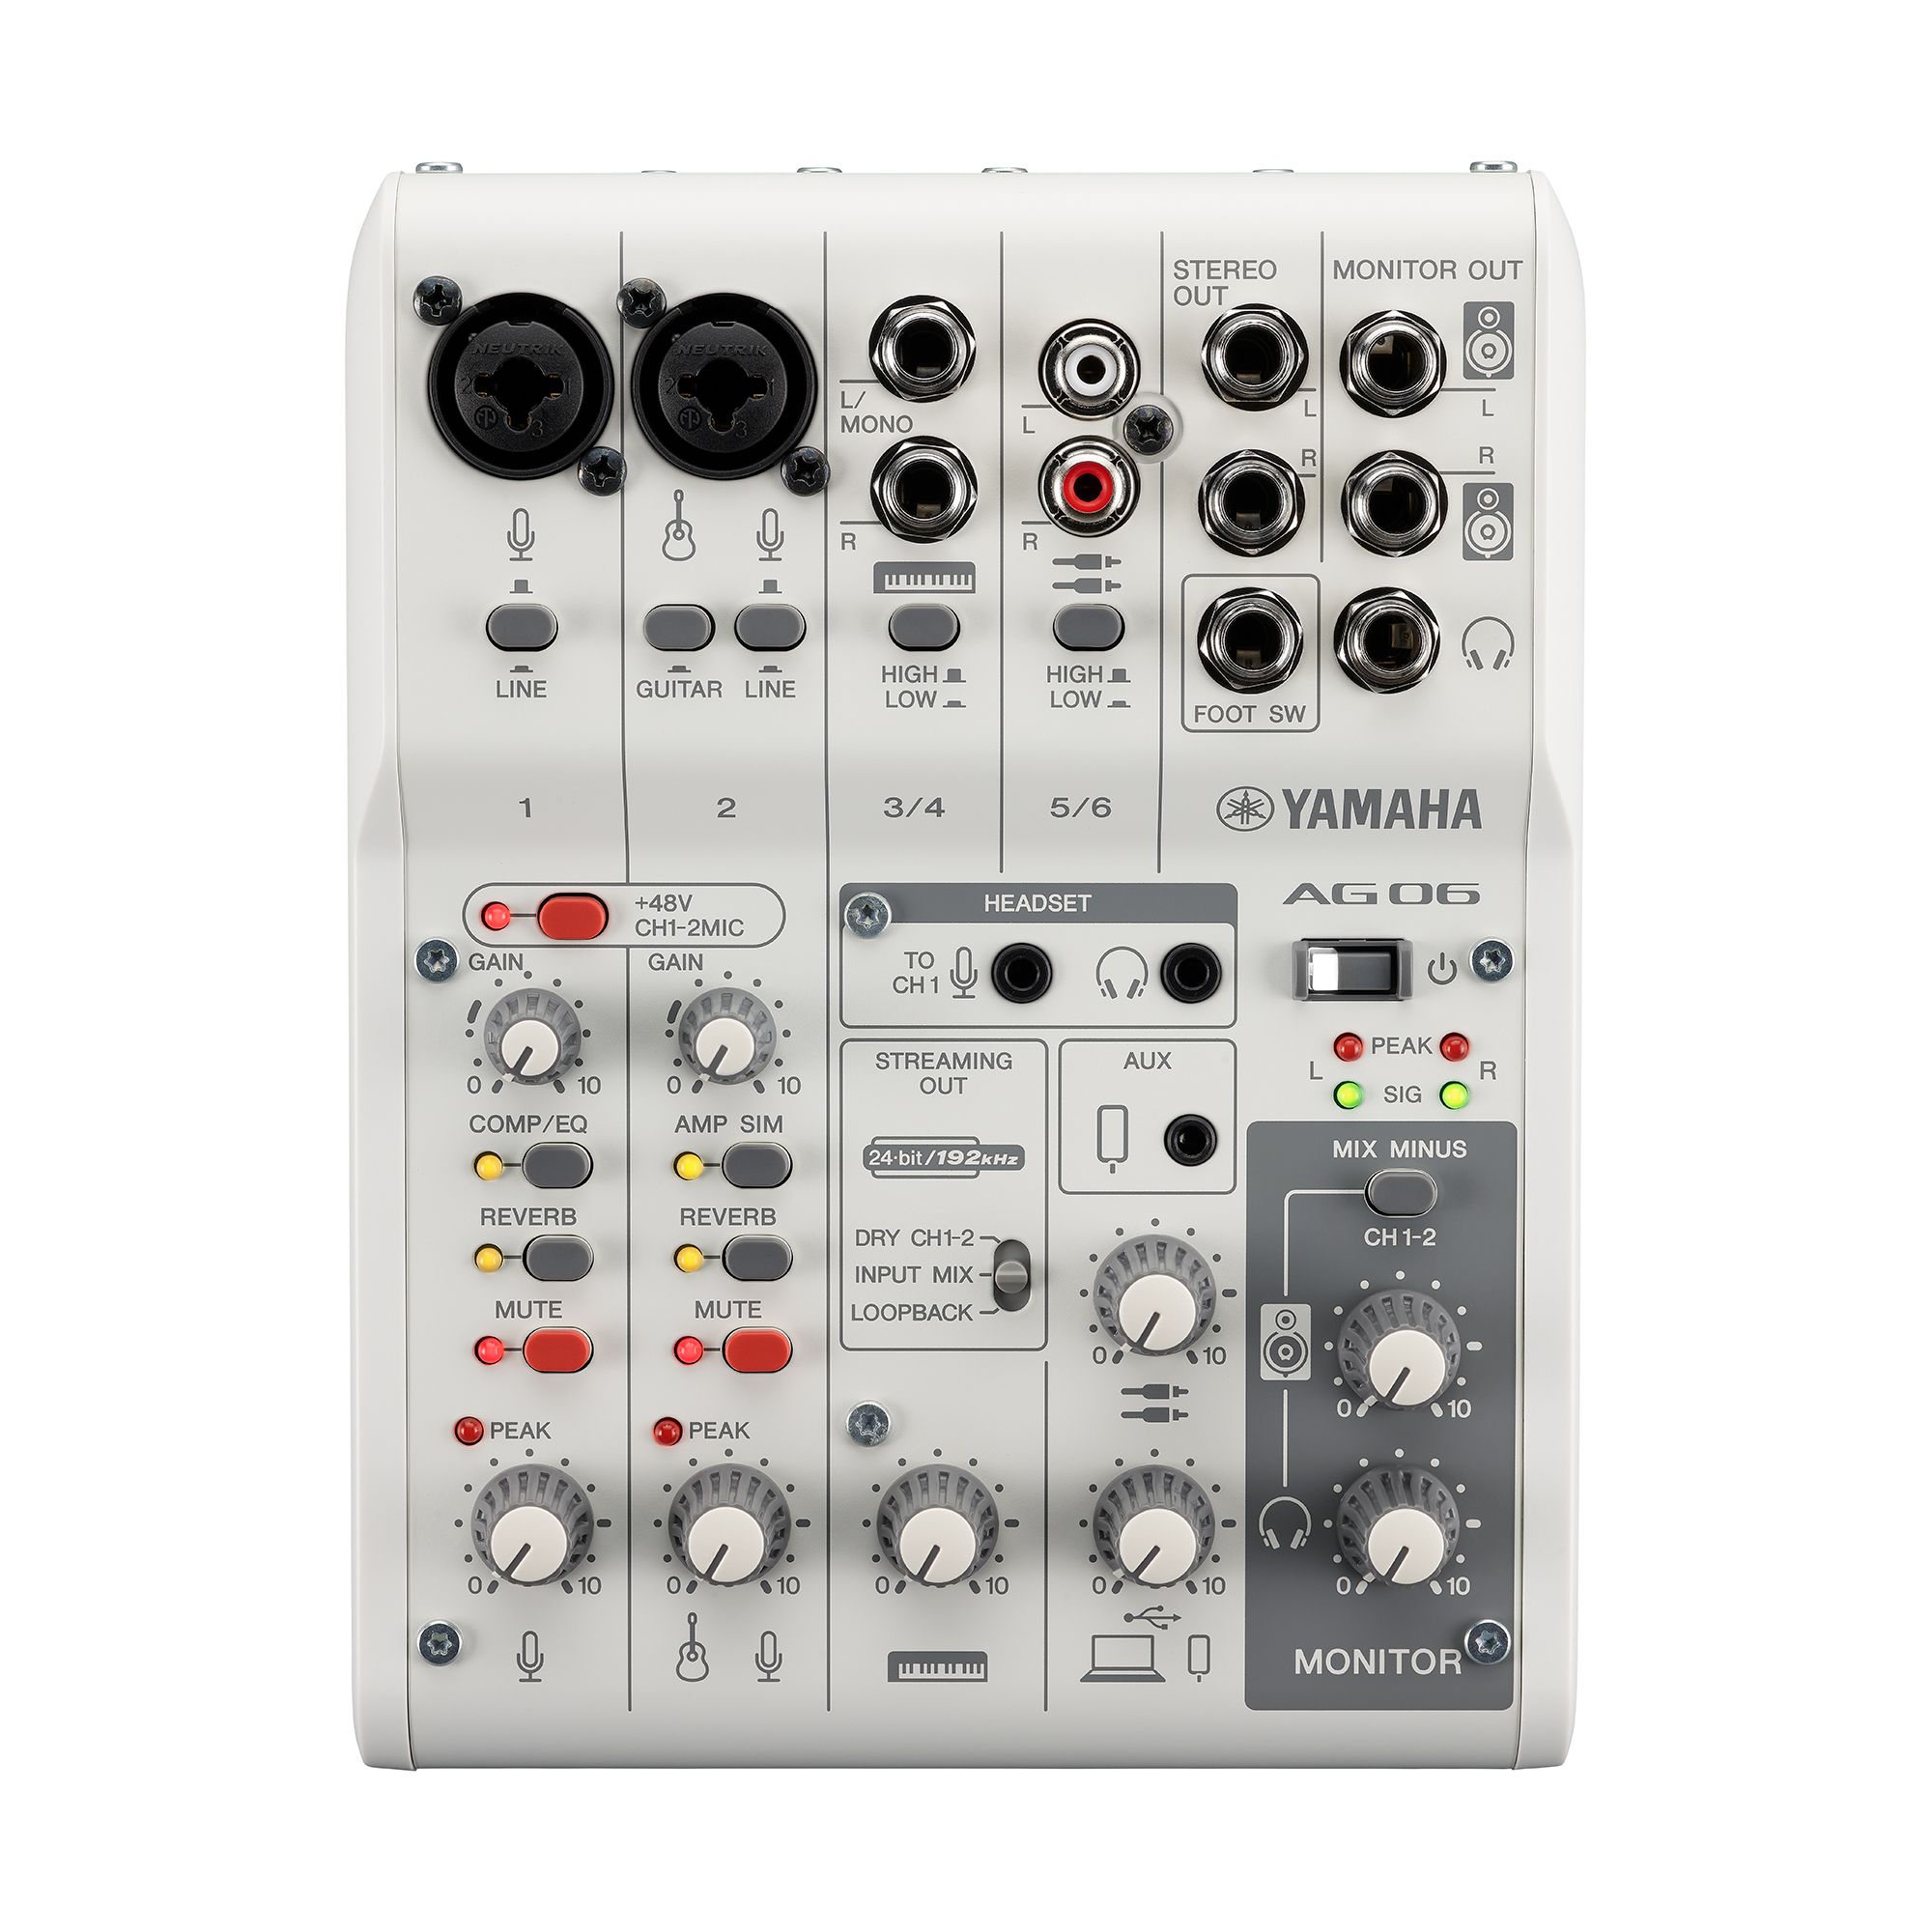 YAMAHA AG06 MK2 6-CHANNEL MIXER AND USB AUDIO INTERFACE